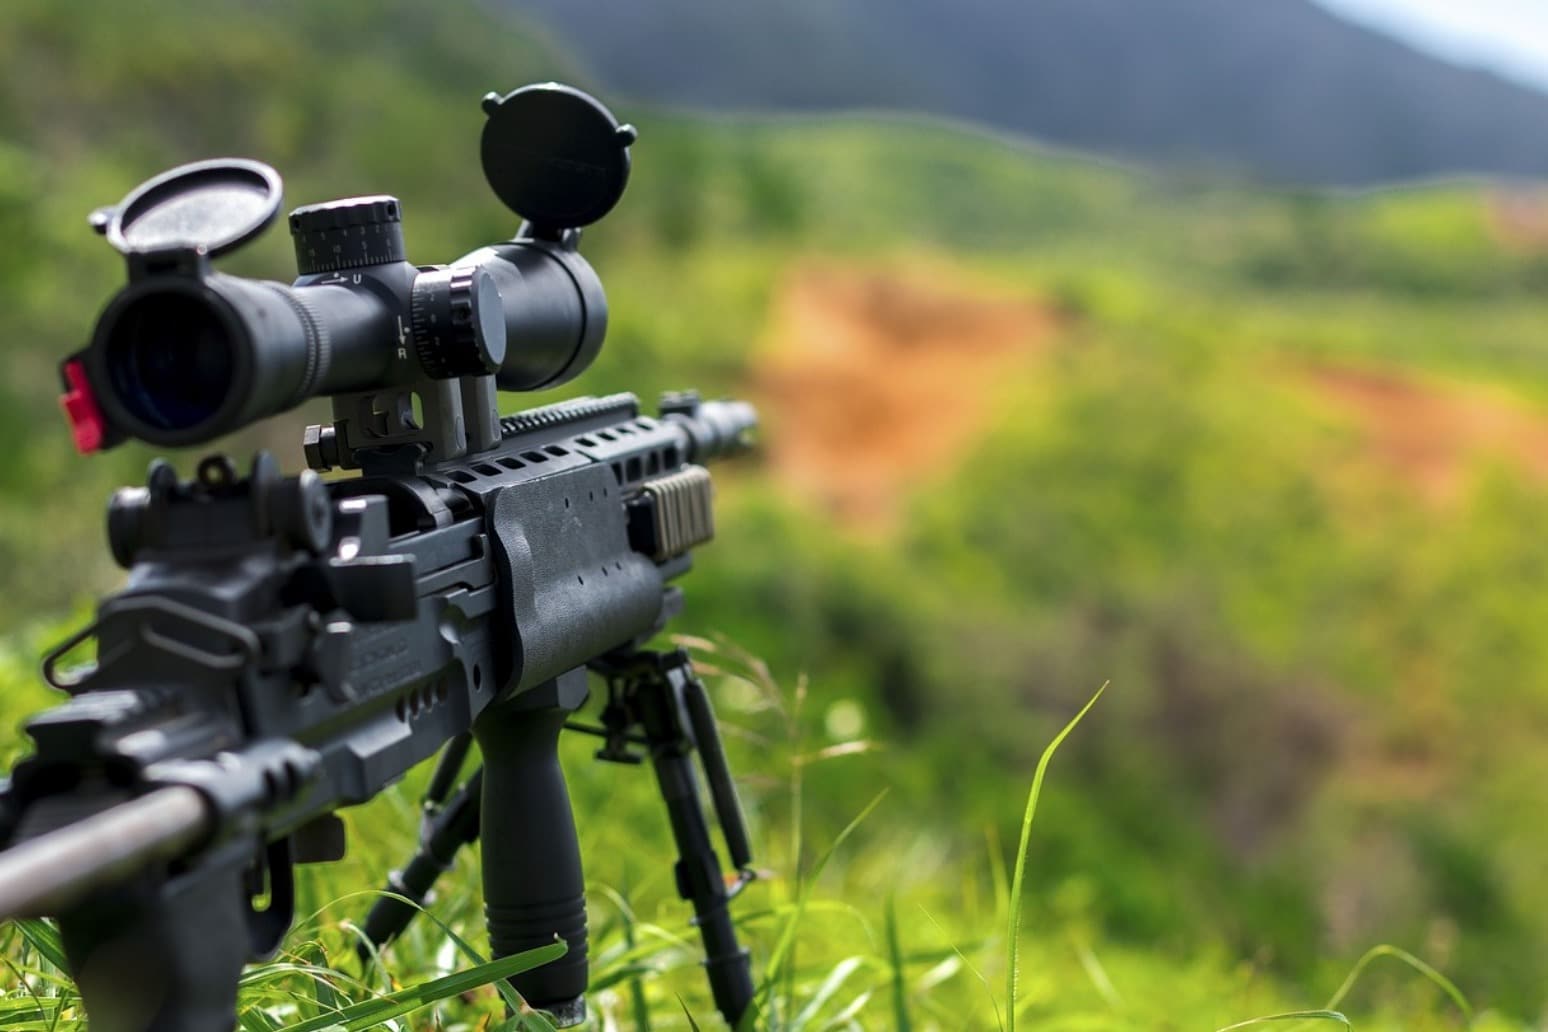 Sniper rifle in a mountain area. File photo by StockSnap.